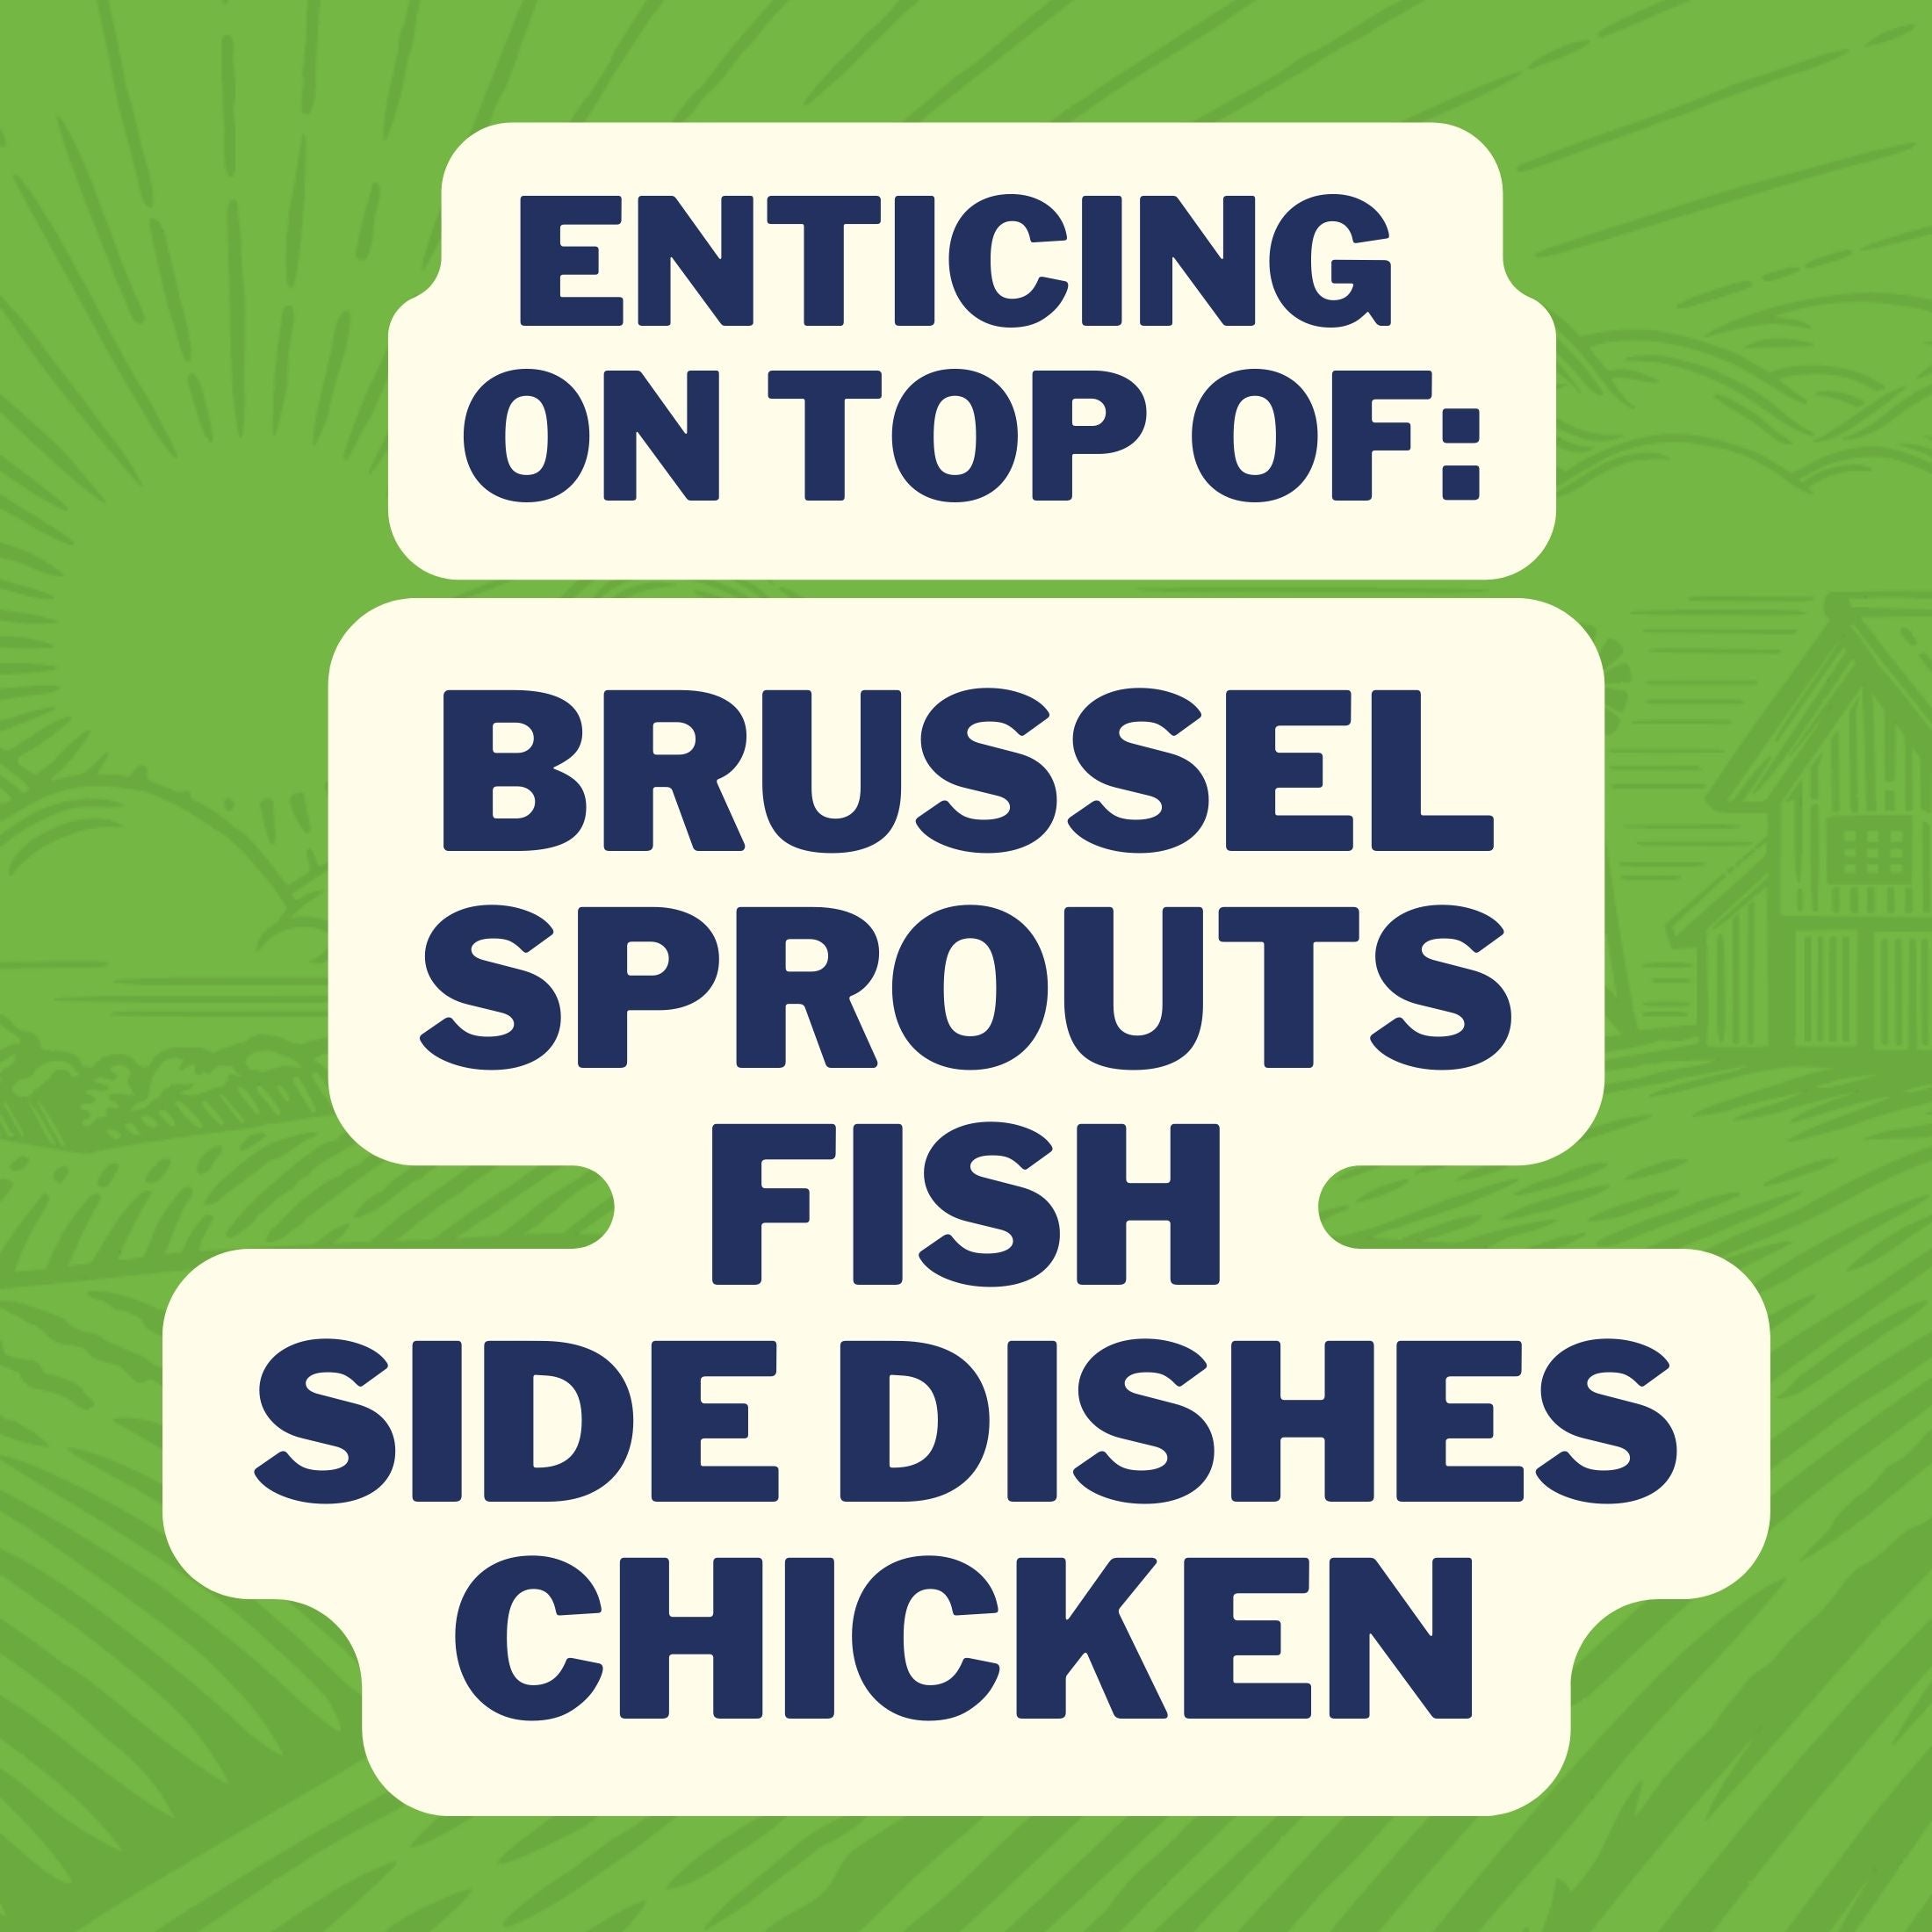 Vampepper is enticing on top of: Brussel Sprouts, Fish, Side Dishes, and Chicken